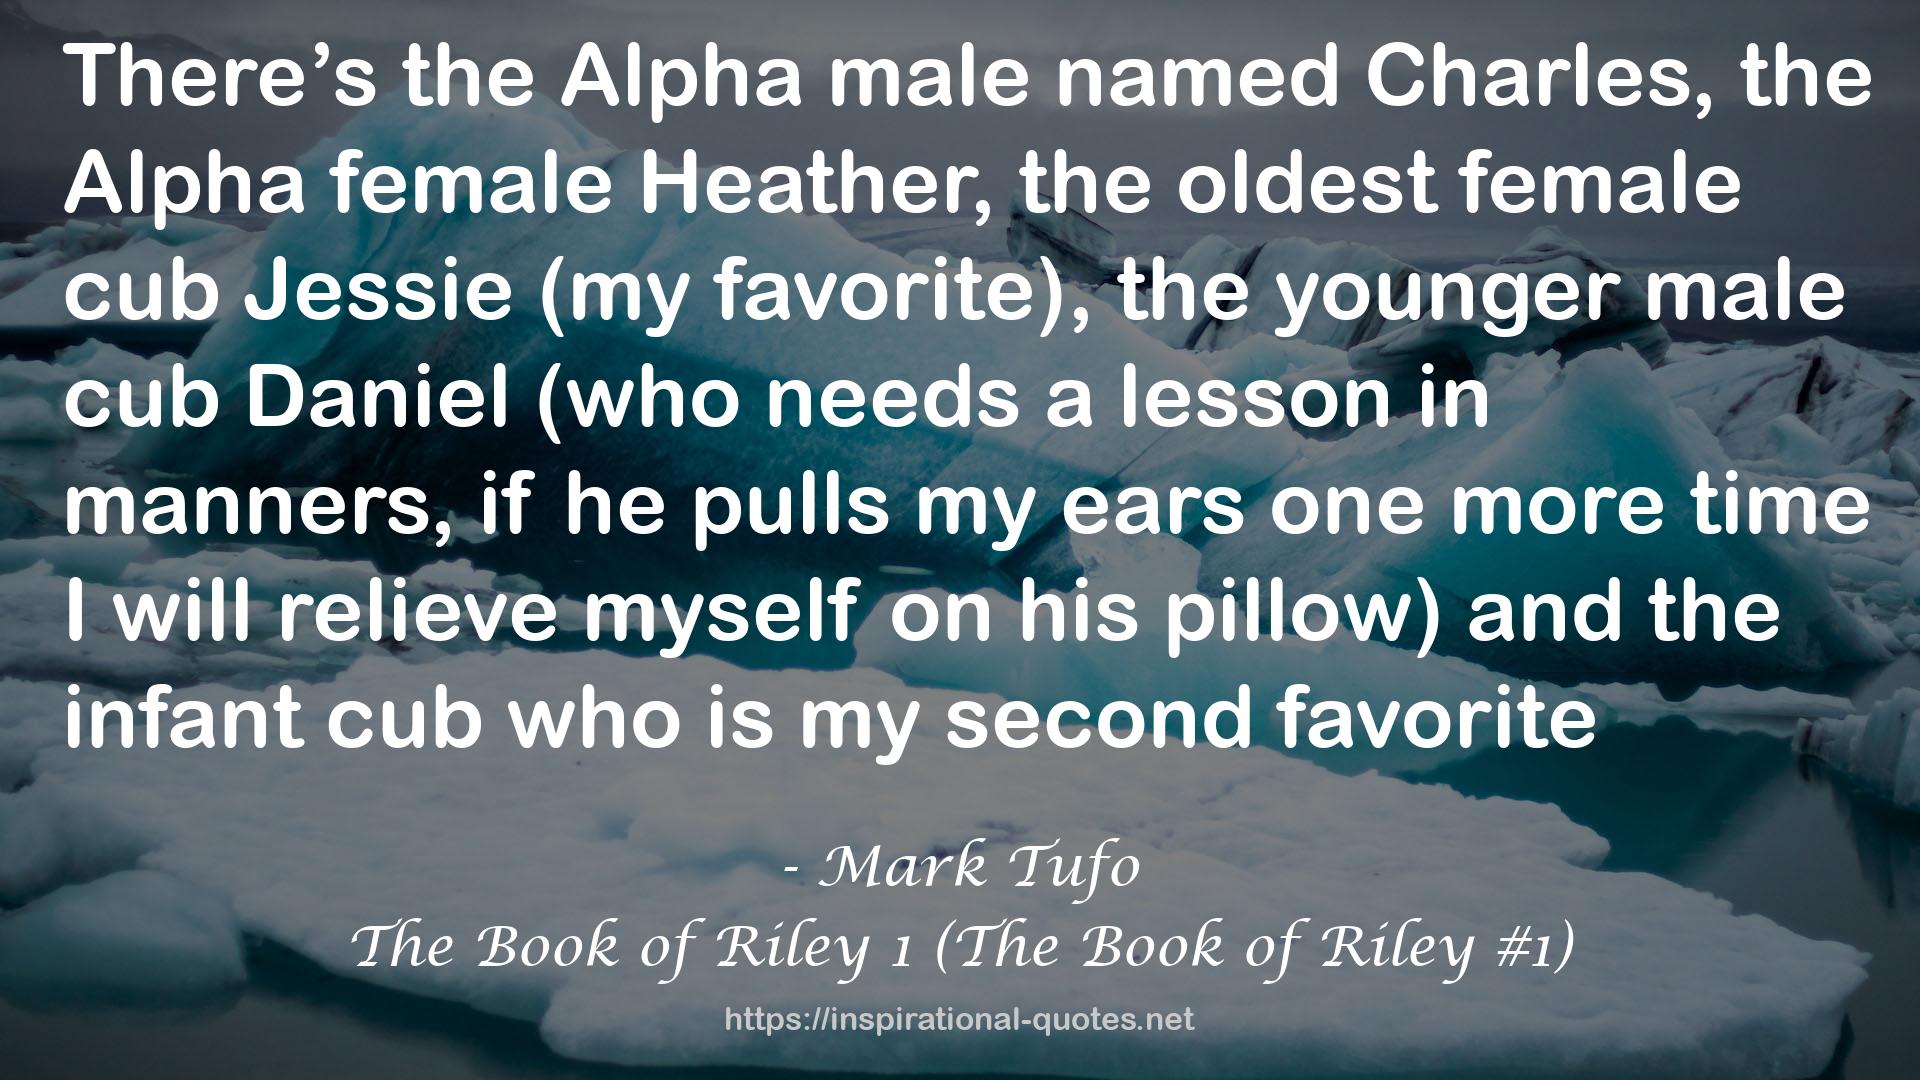 The Book of Riley 1 (The Book of Riley #1) QUOTES